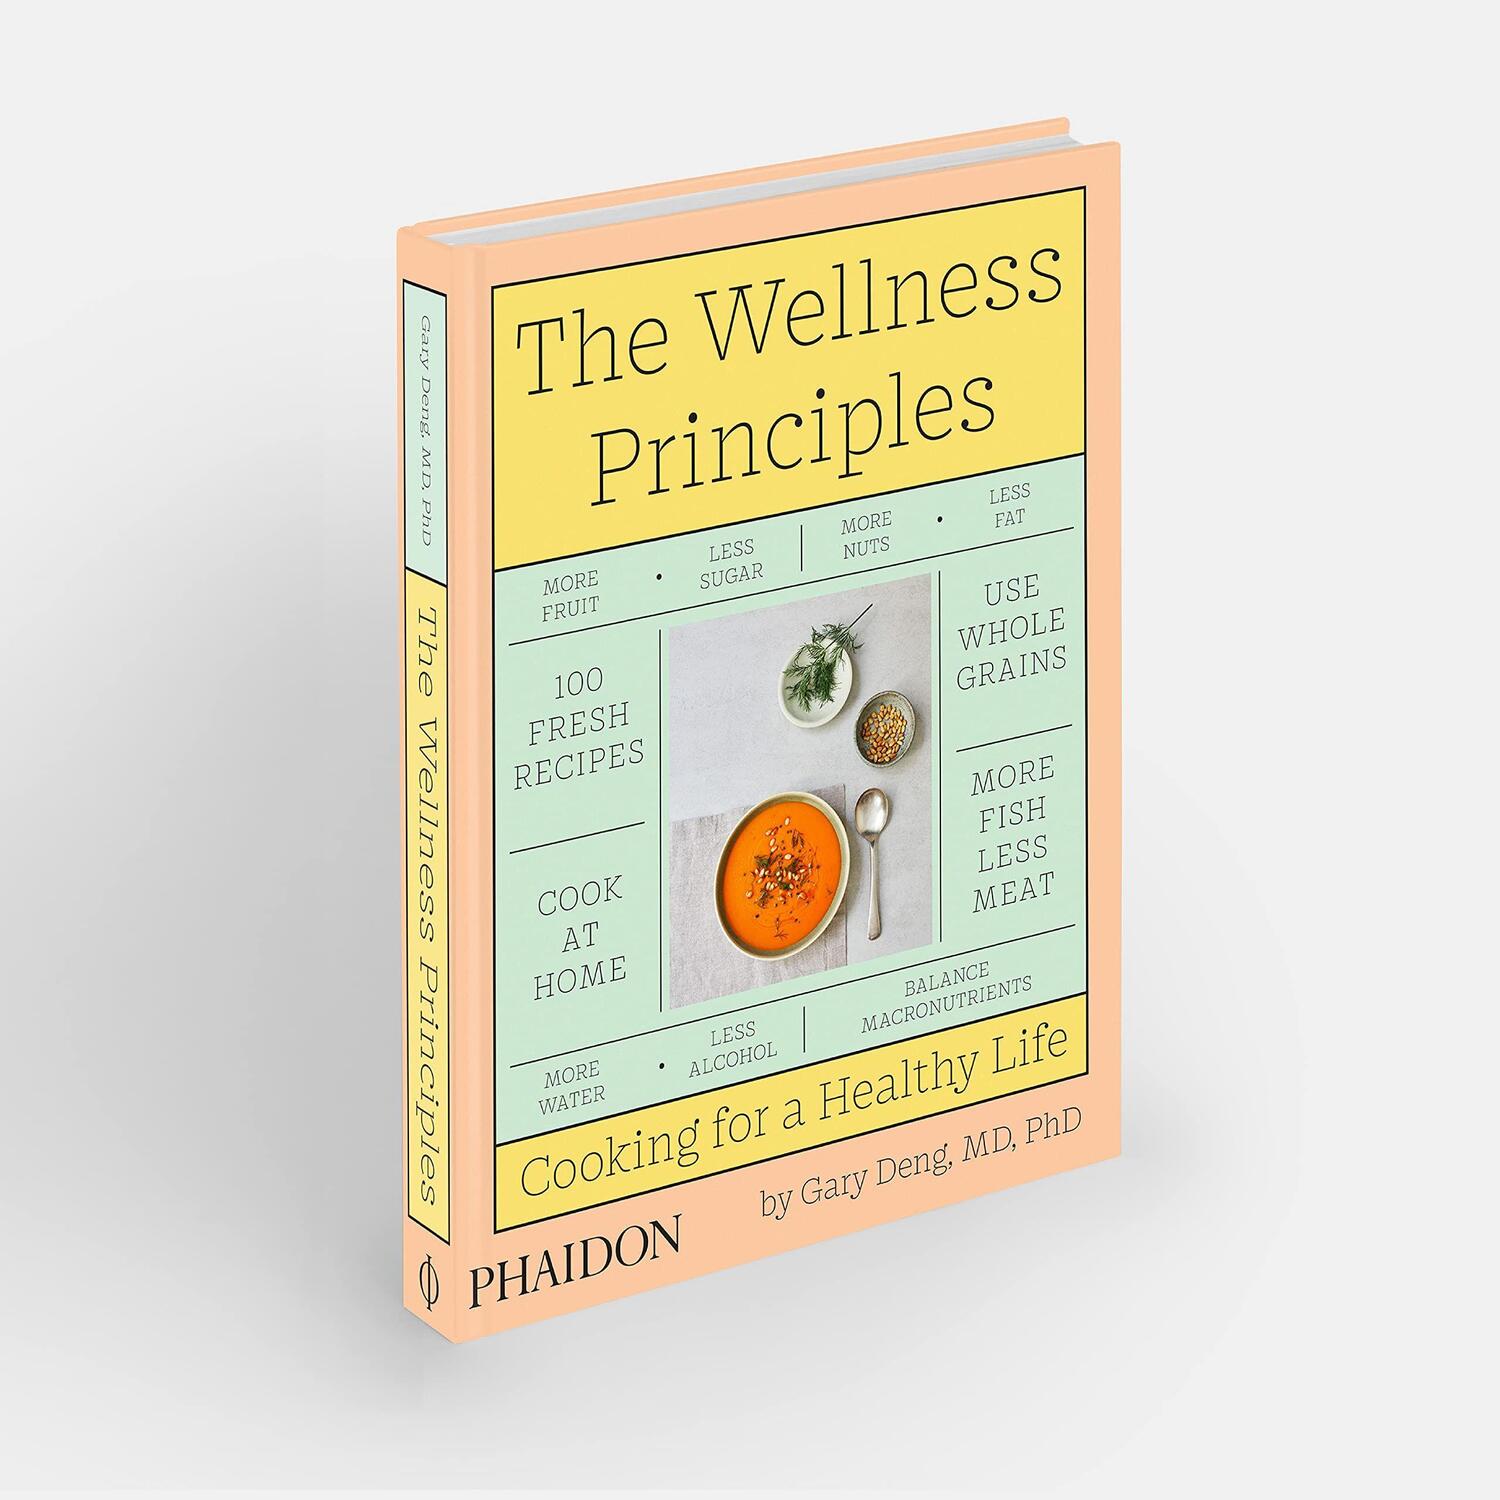 Bild: 9781838664756 | The Wellness Principles | Cooking for a Healthy Life | Gary Deng